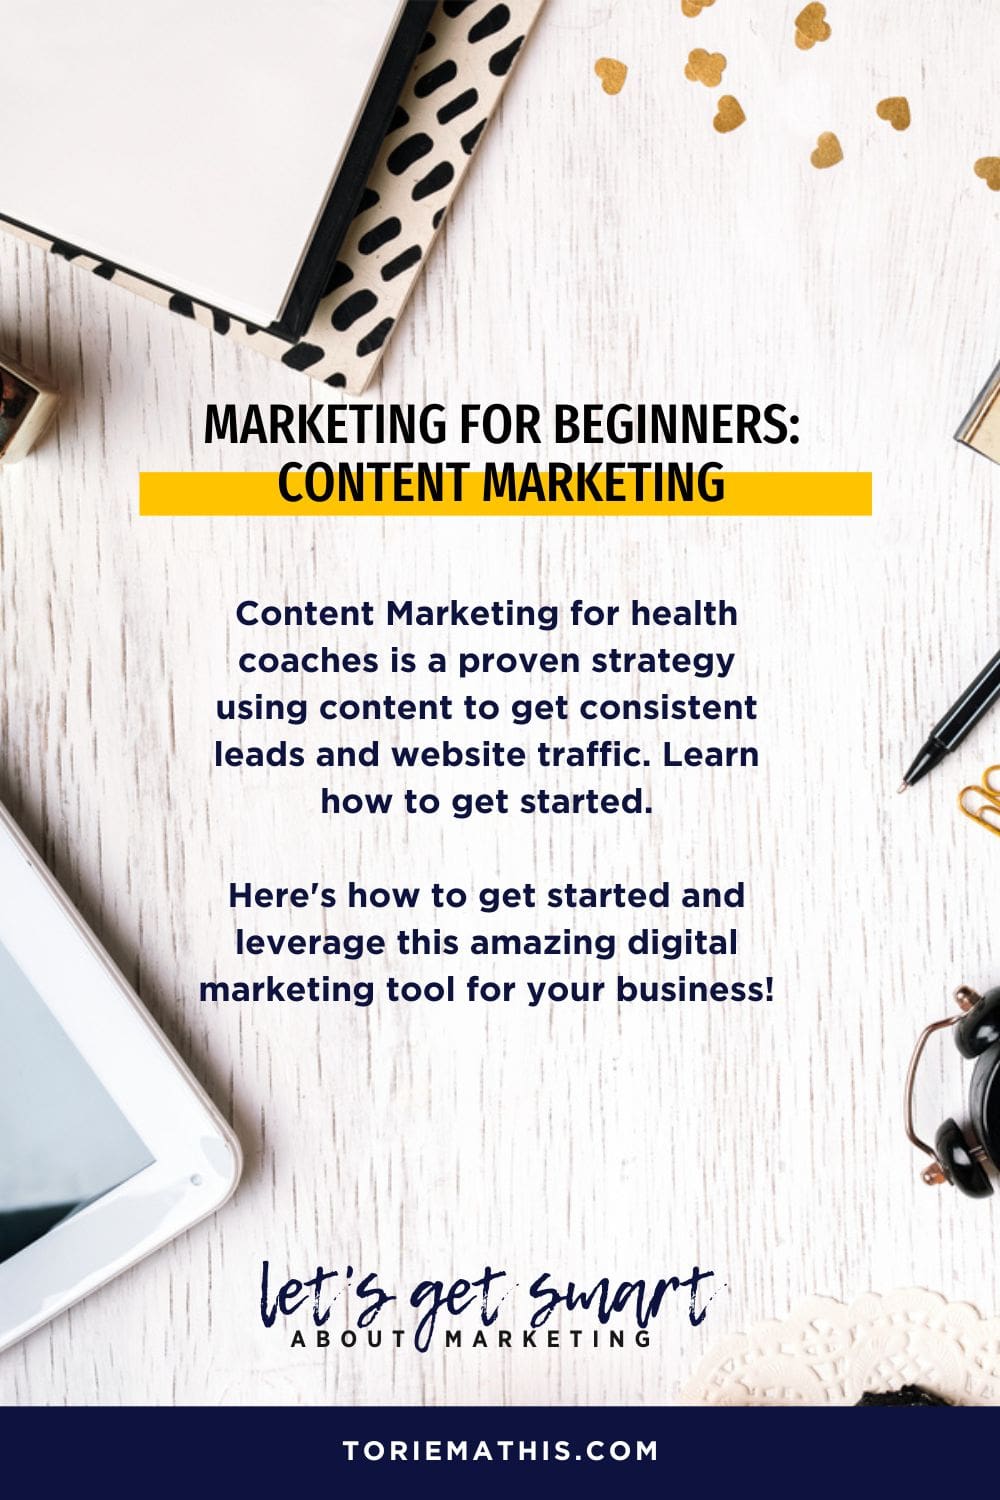 Content Marketing for Health Coaches - How to Get Started